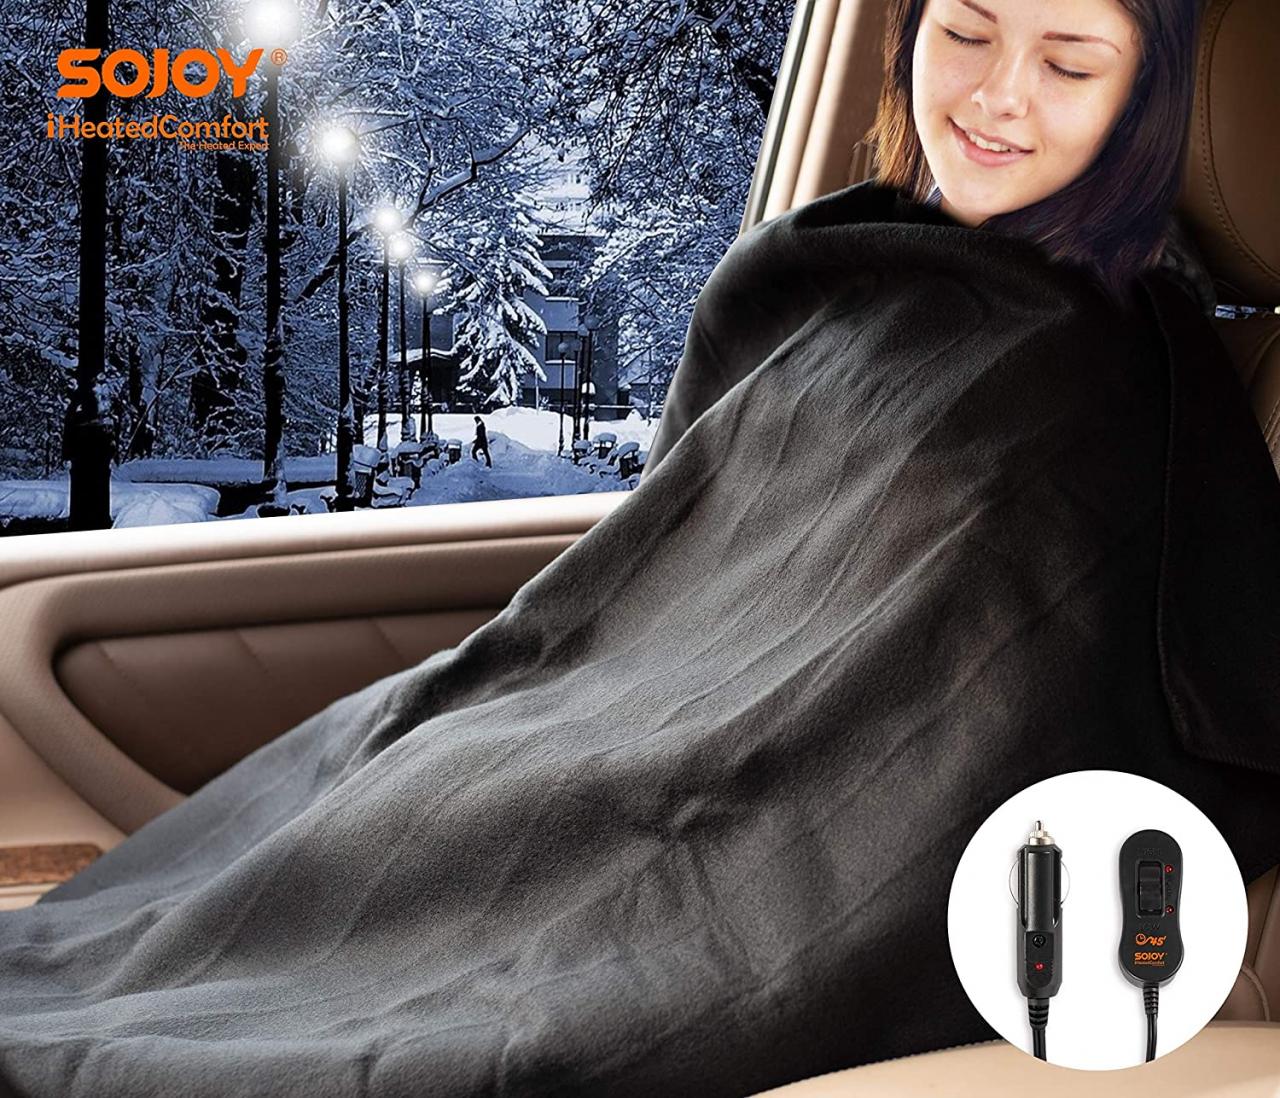 Sojoy Heated Blanket for Car Warm in Winter Electric Blanket